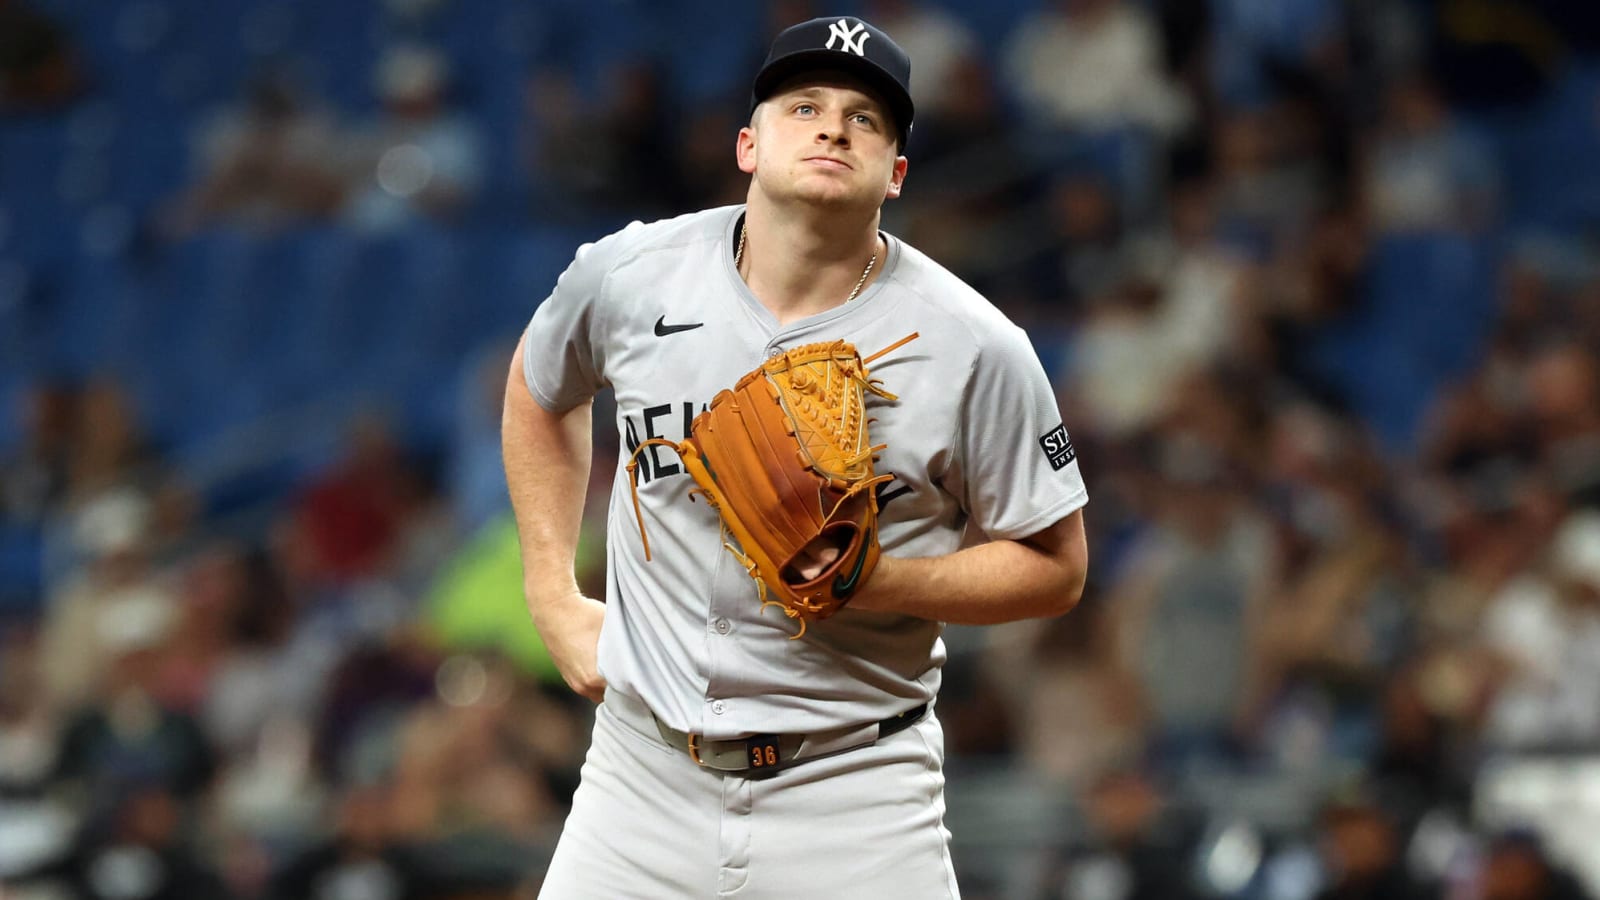 The Yankees might get an All-Star appearance from an unsuspecting starting pitcher